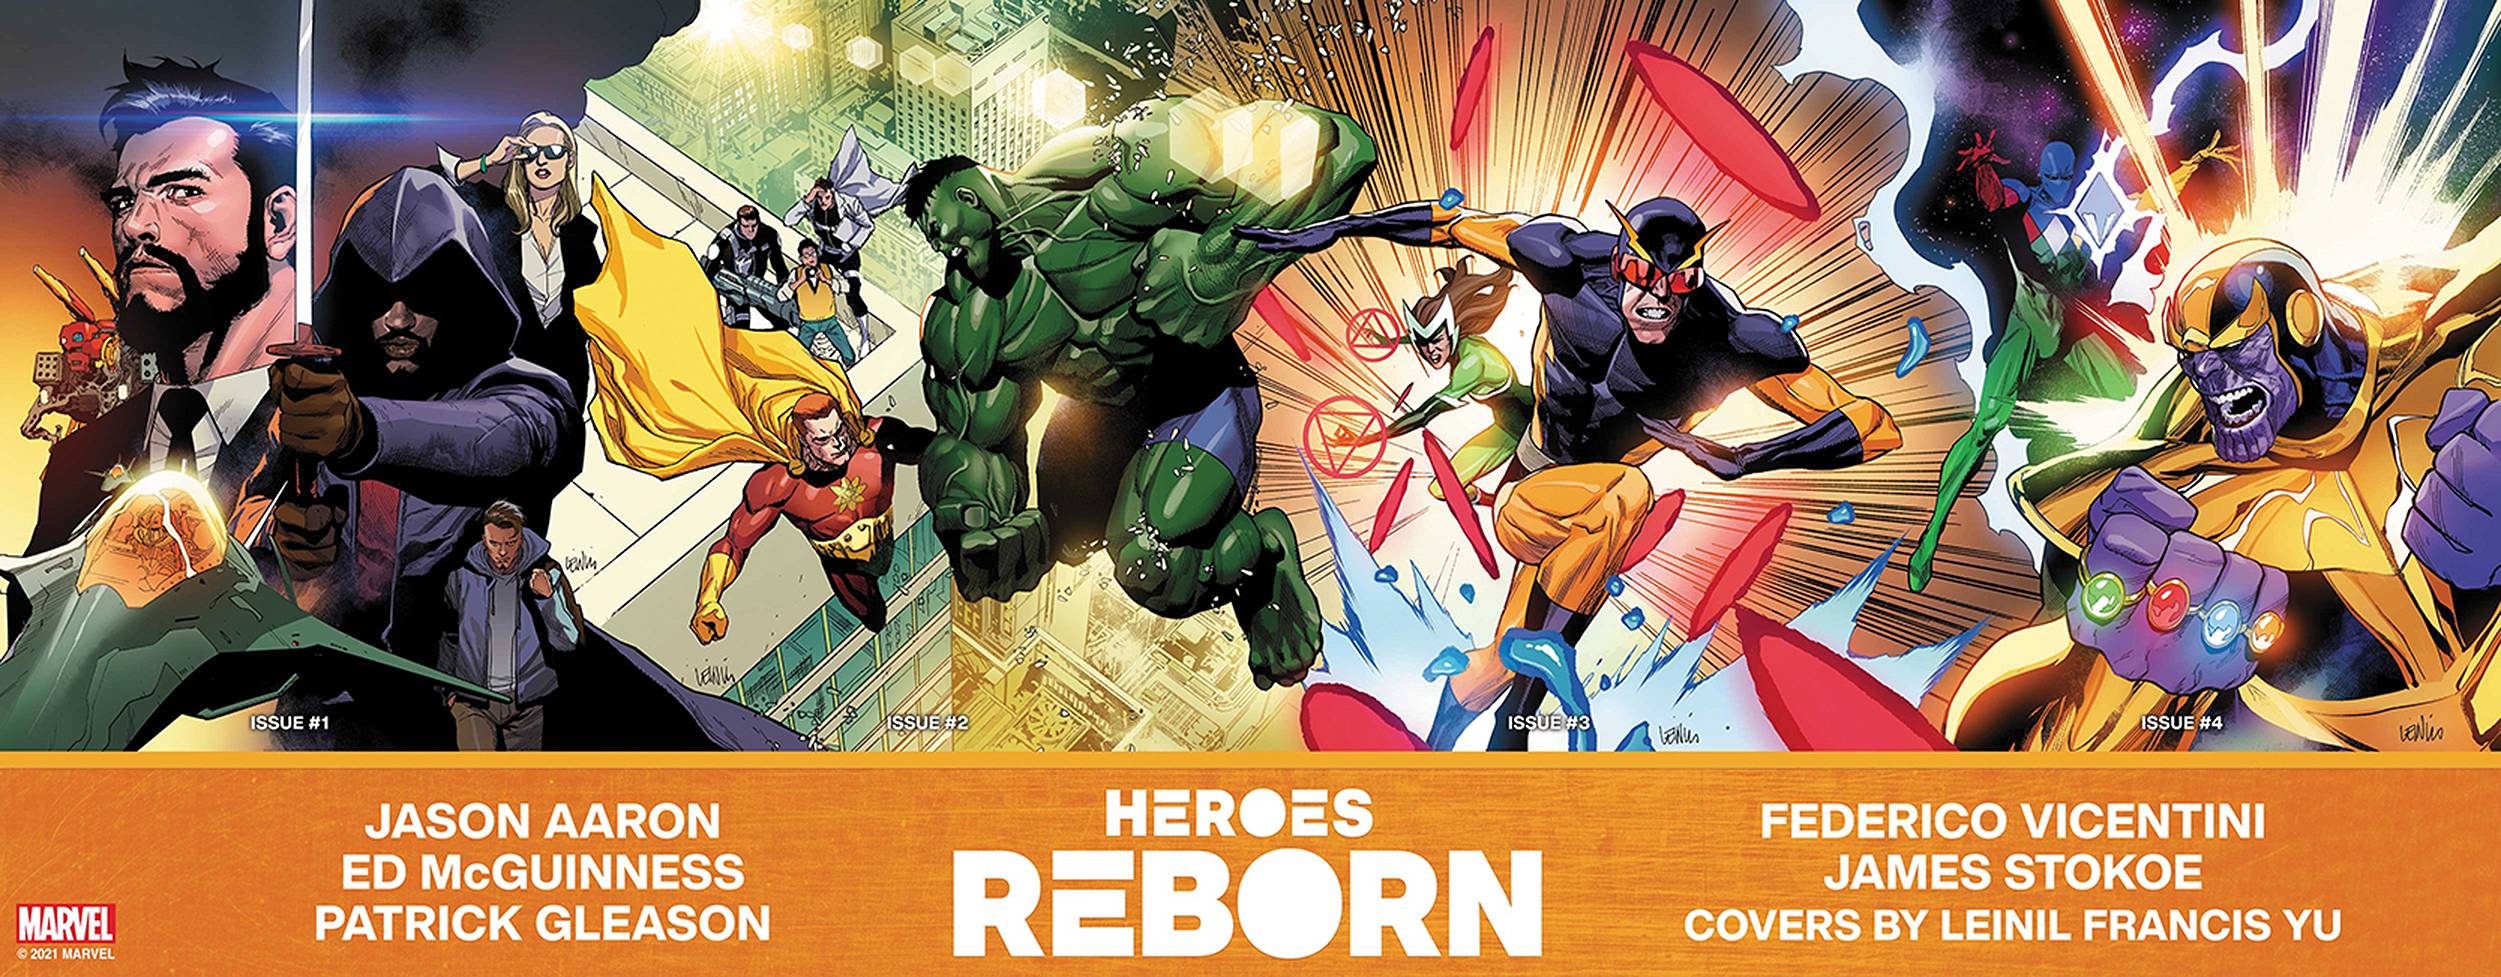 DF HEROES REBORN #1 MCGUINNESS SILVER SGN